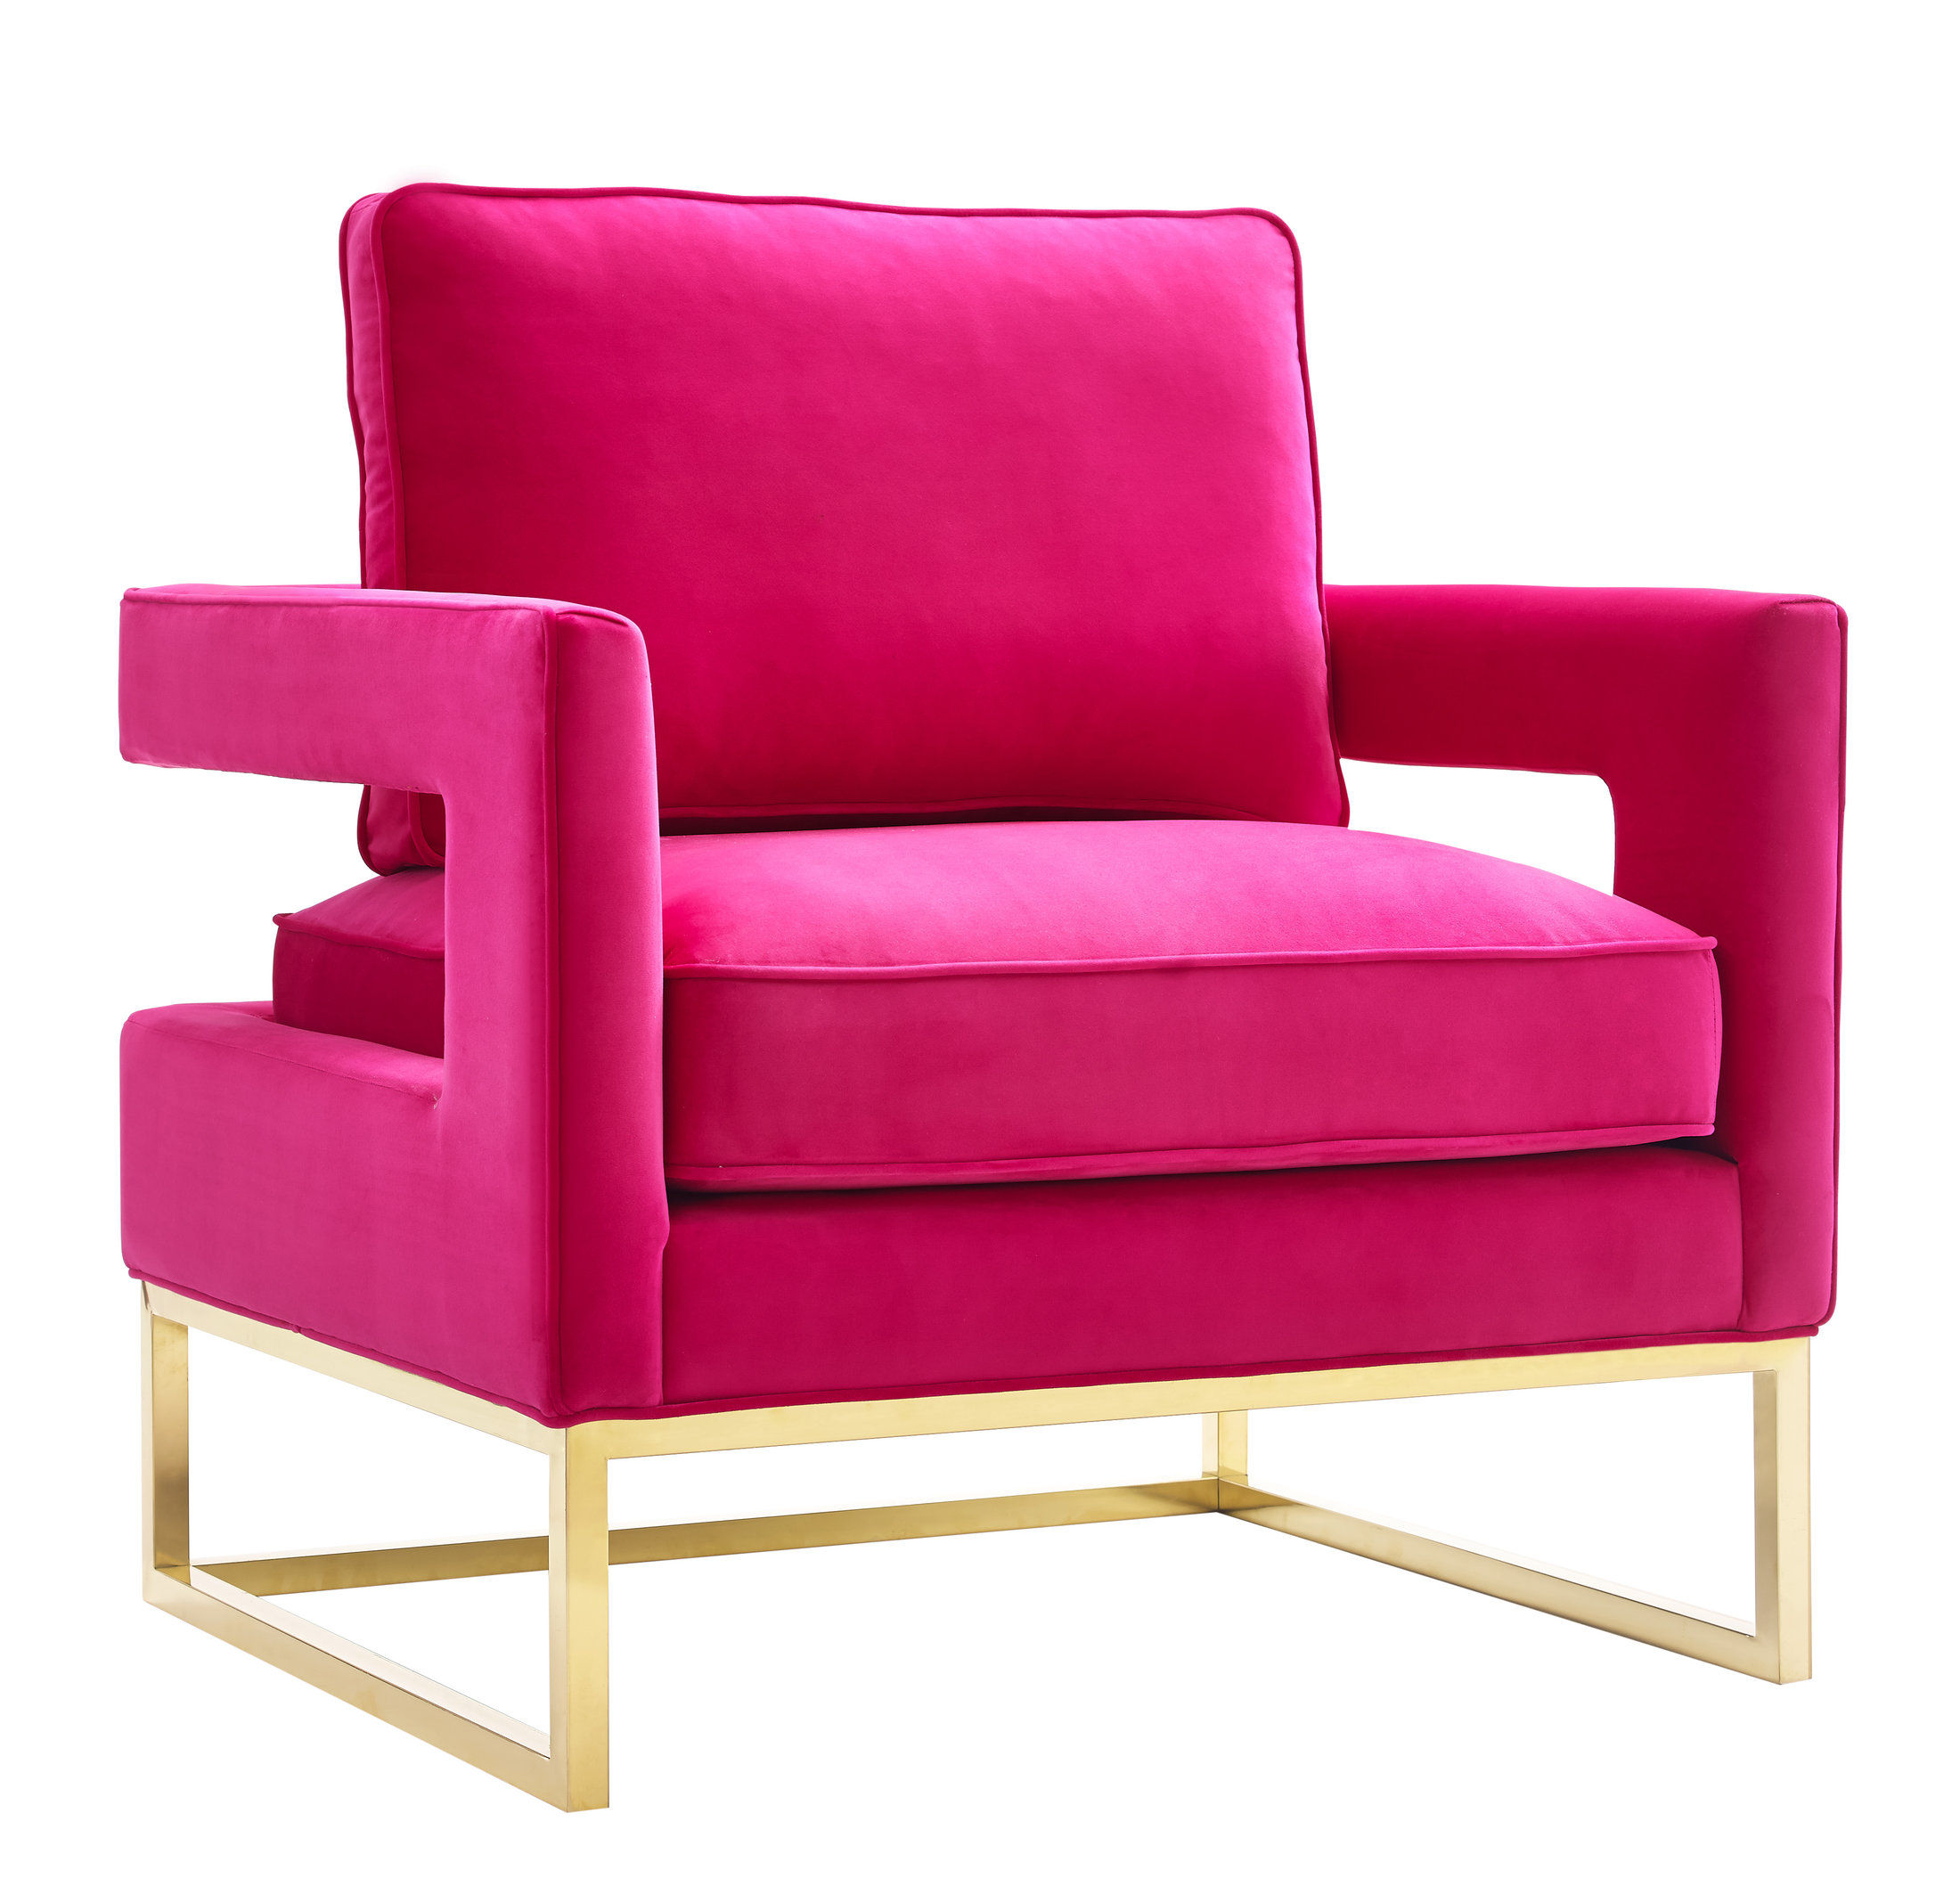 TOV Furniture Avery Pink Velvet Chair | The Classy Home